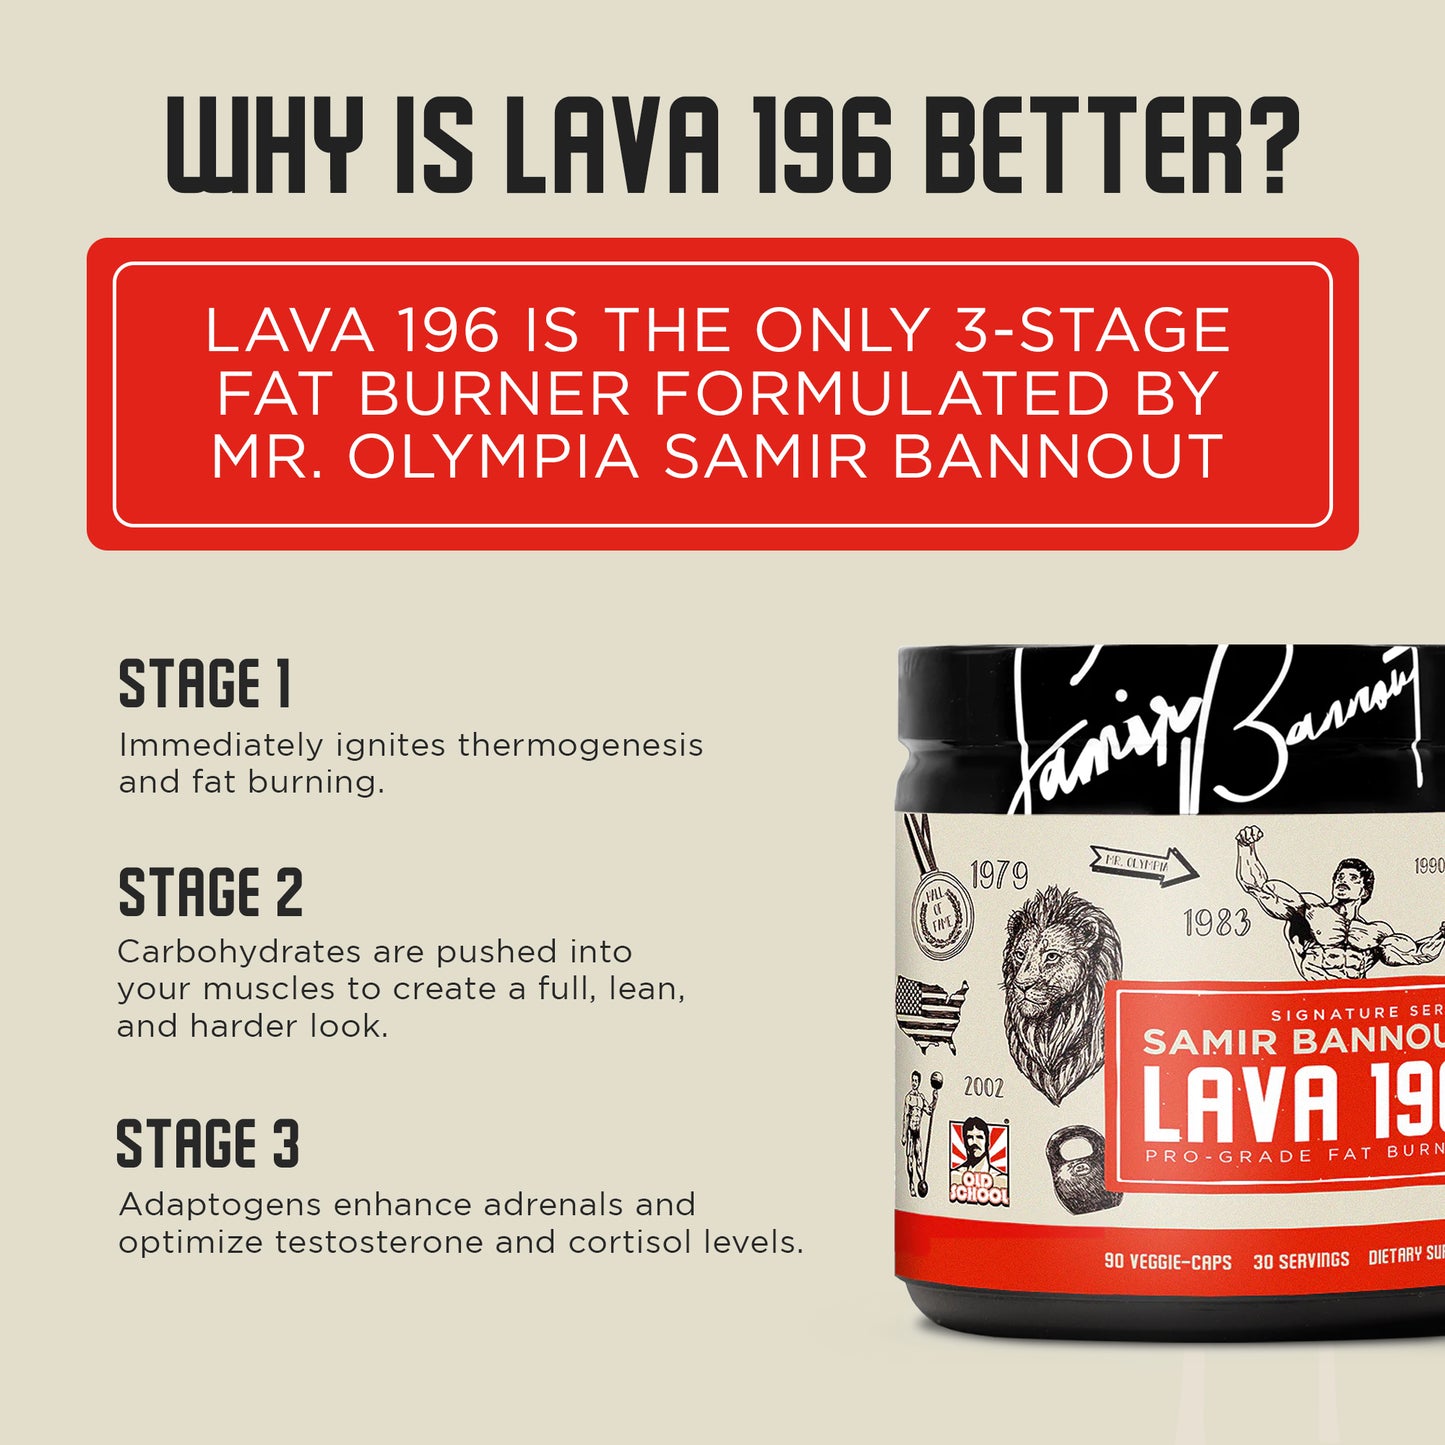 Why LAVA 196 is better